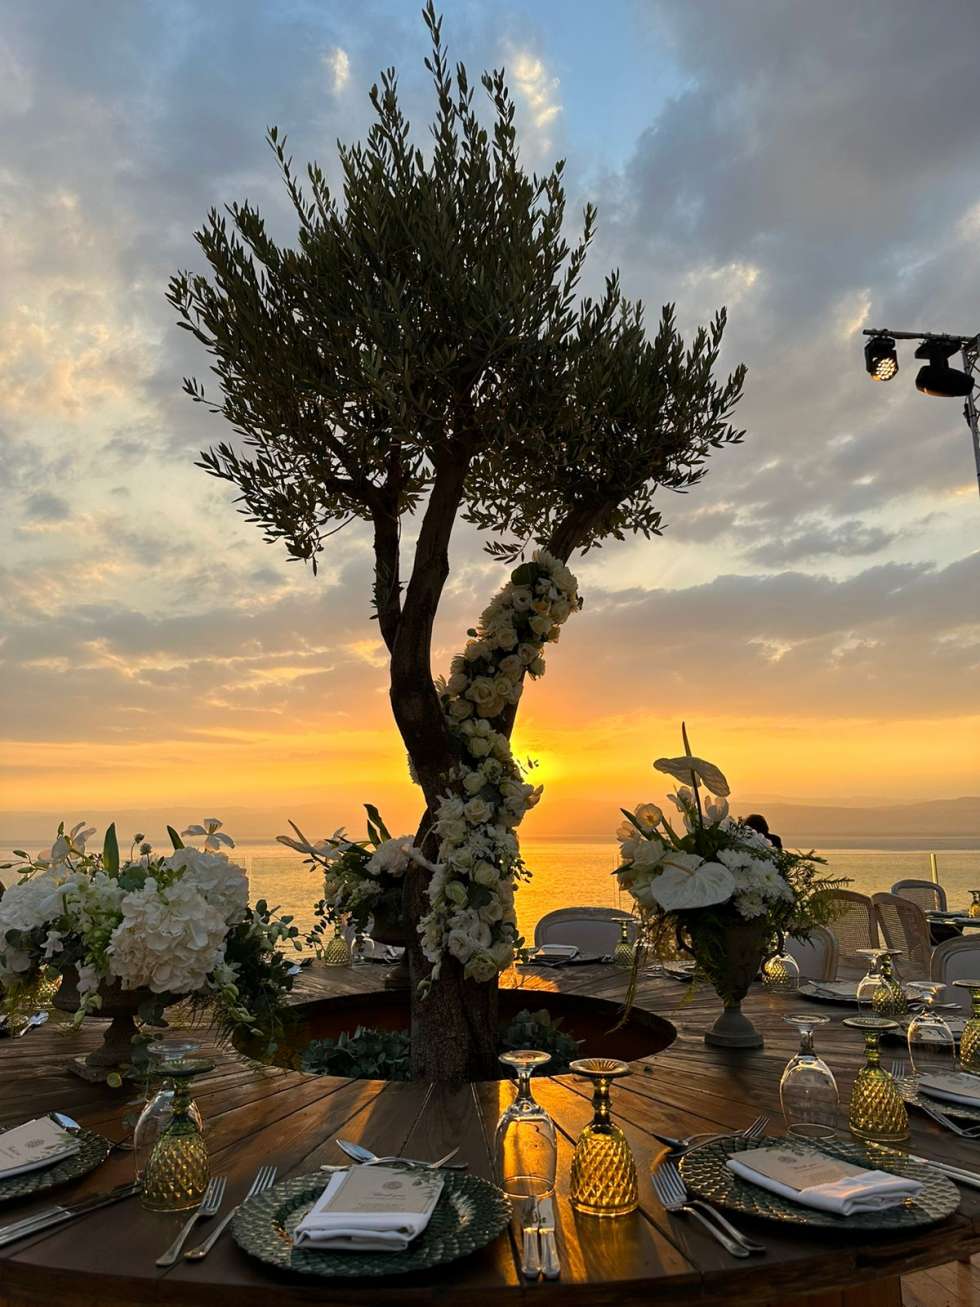 Seas The Day: A Spectacular Wedding at The Dead Sea